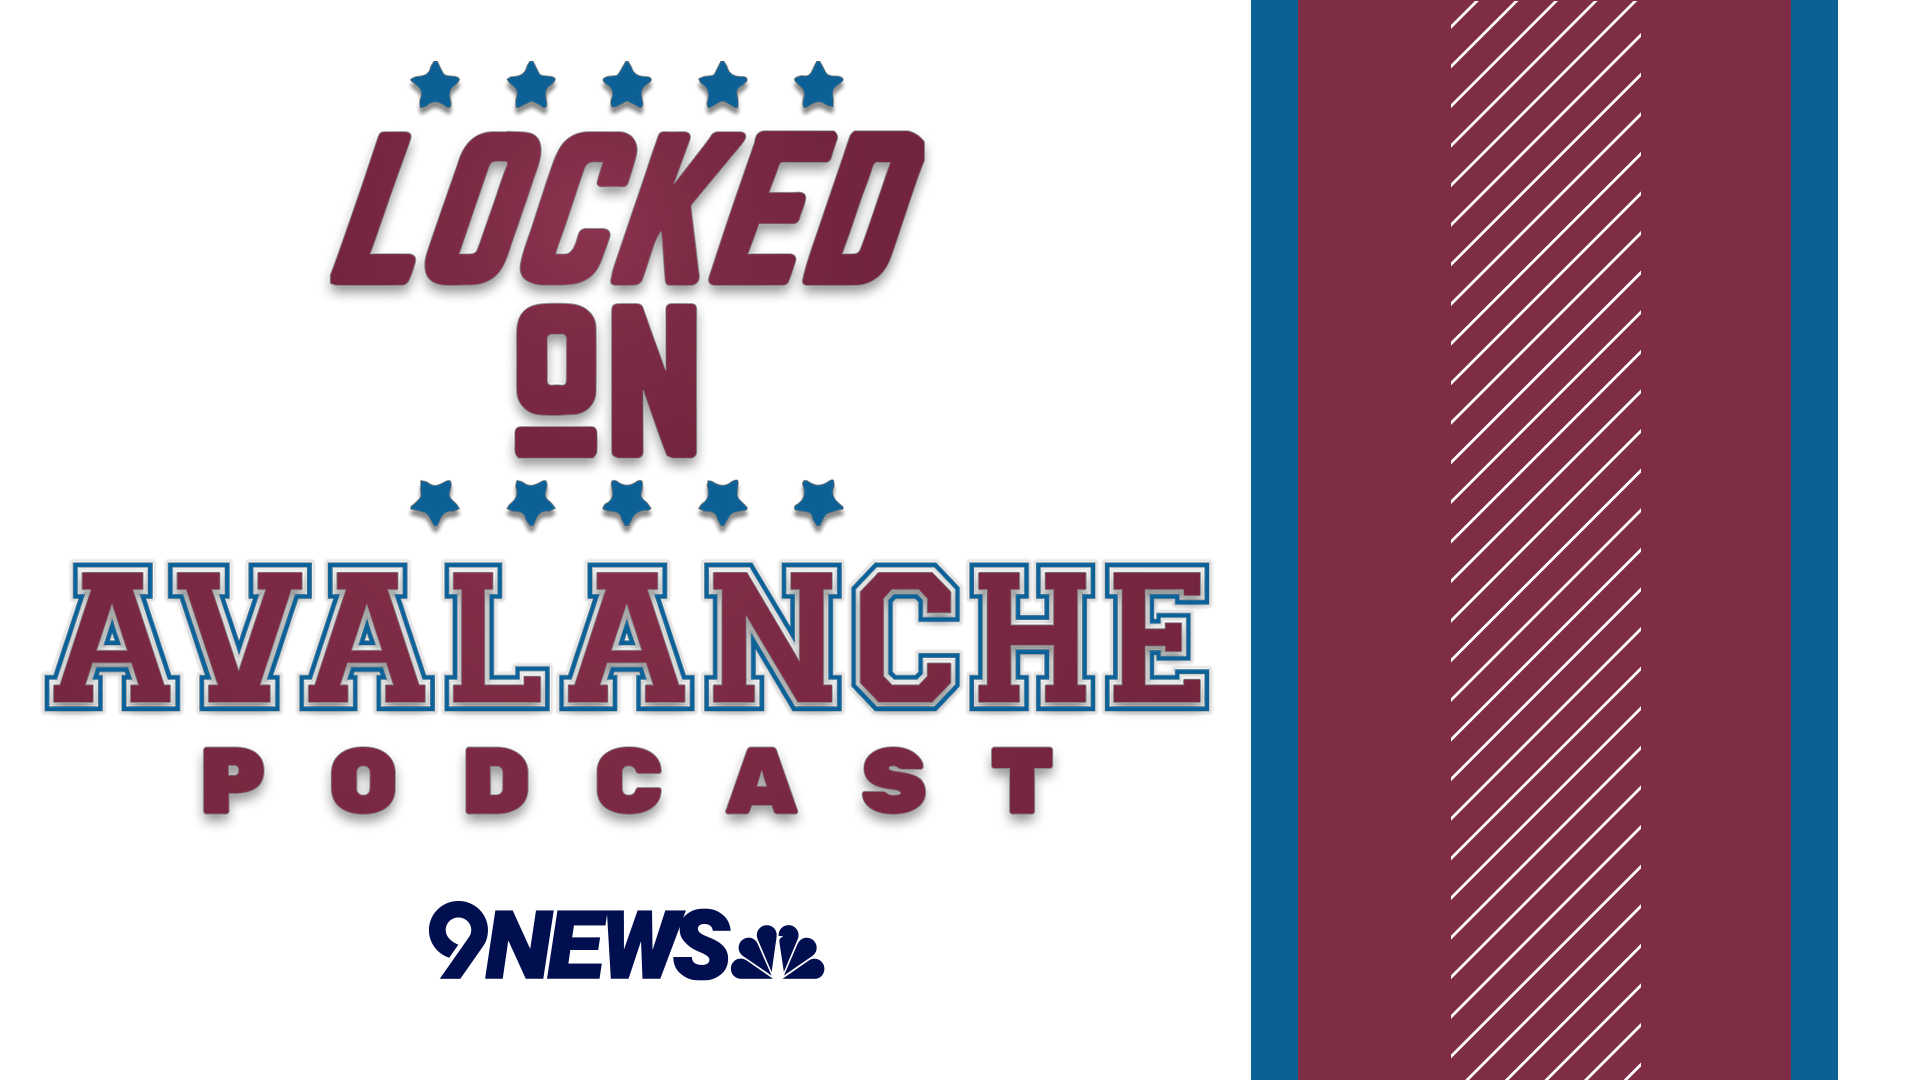 COVID-19 has put the Avalanche season on hold for the second time this year. Kyle Sullivan joins Locked On Avalanche to share his thoughts.